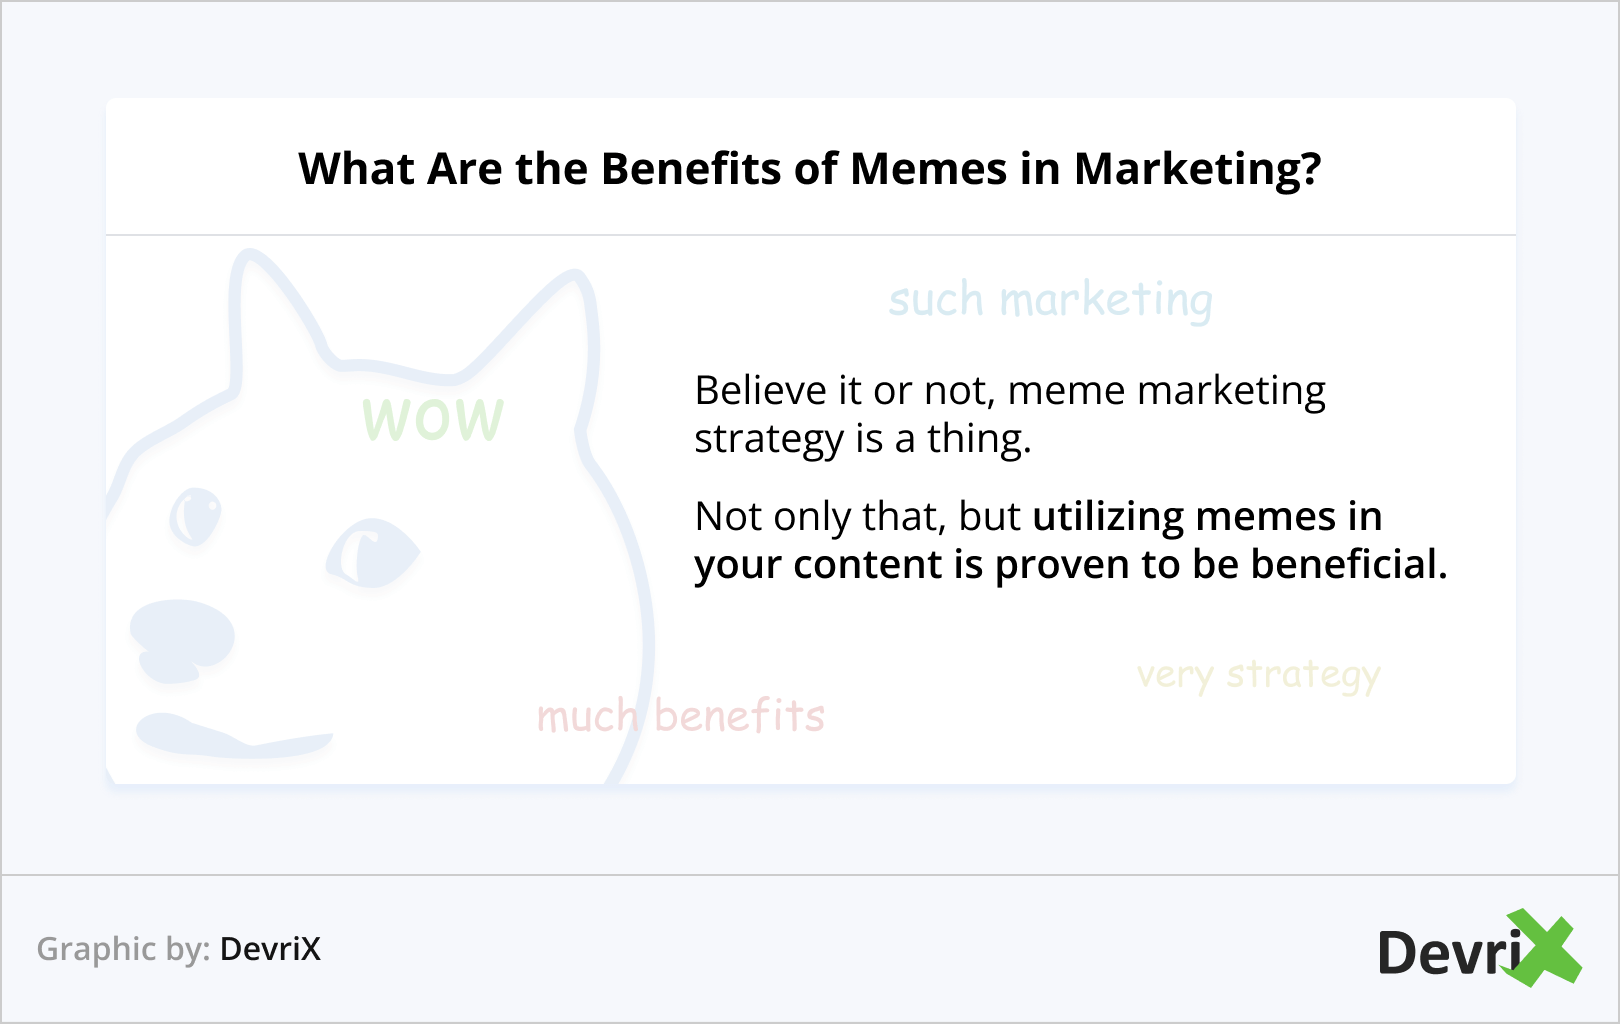 4. What Are the Benefits of Memes in Marketing